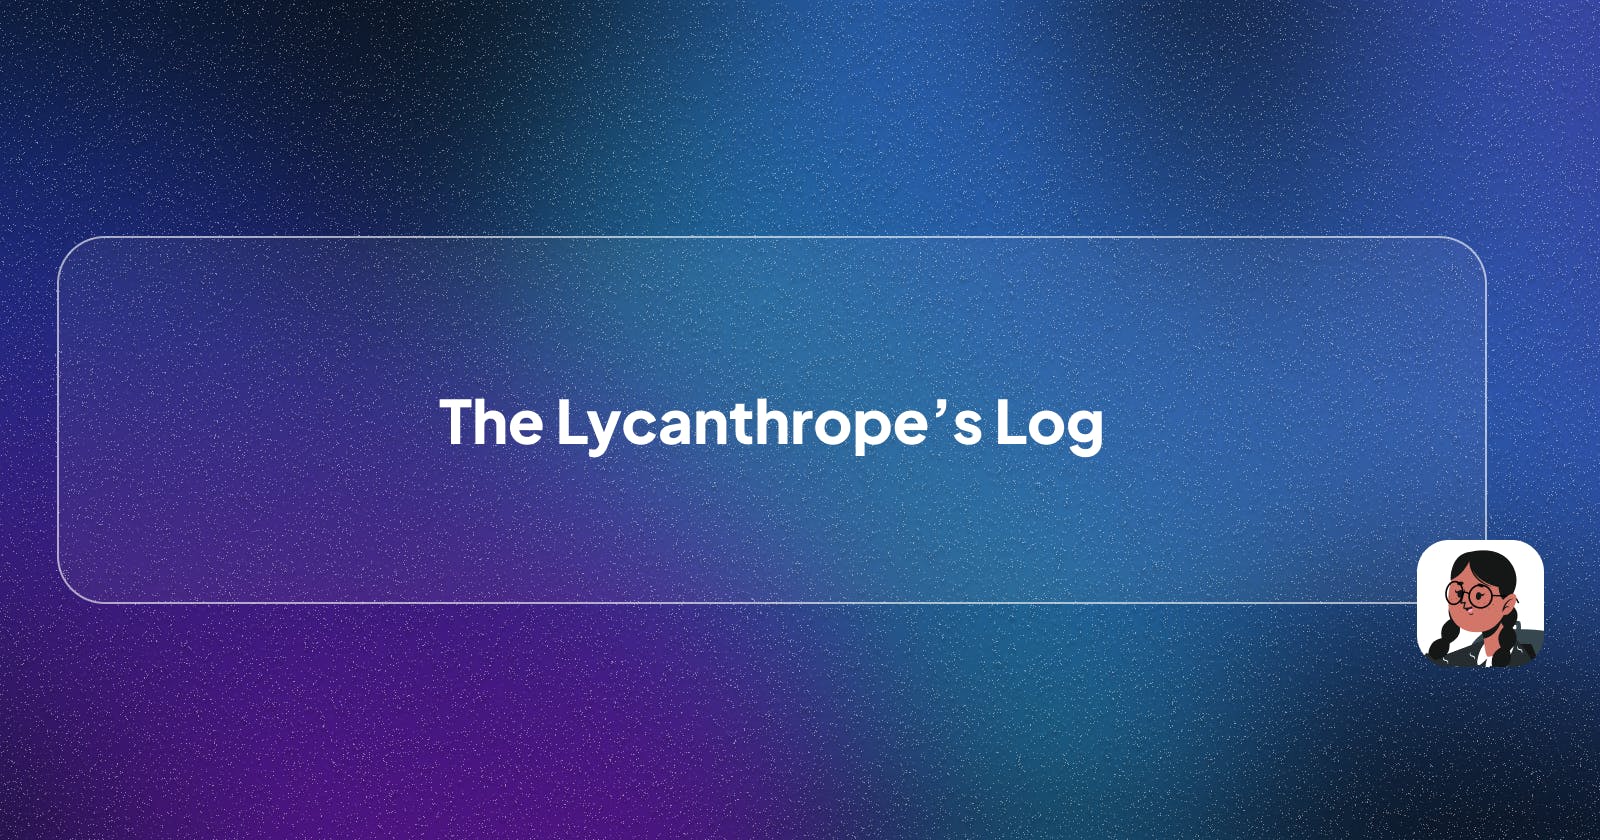 The Lycanthrope’s Log